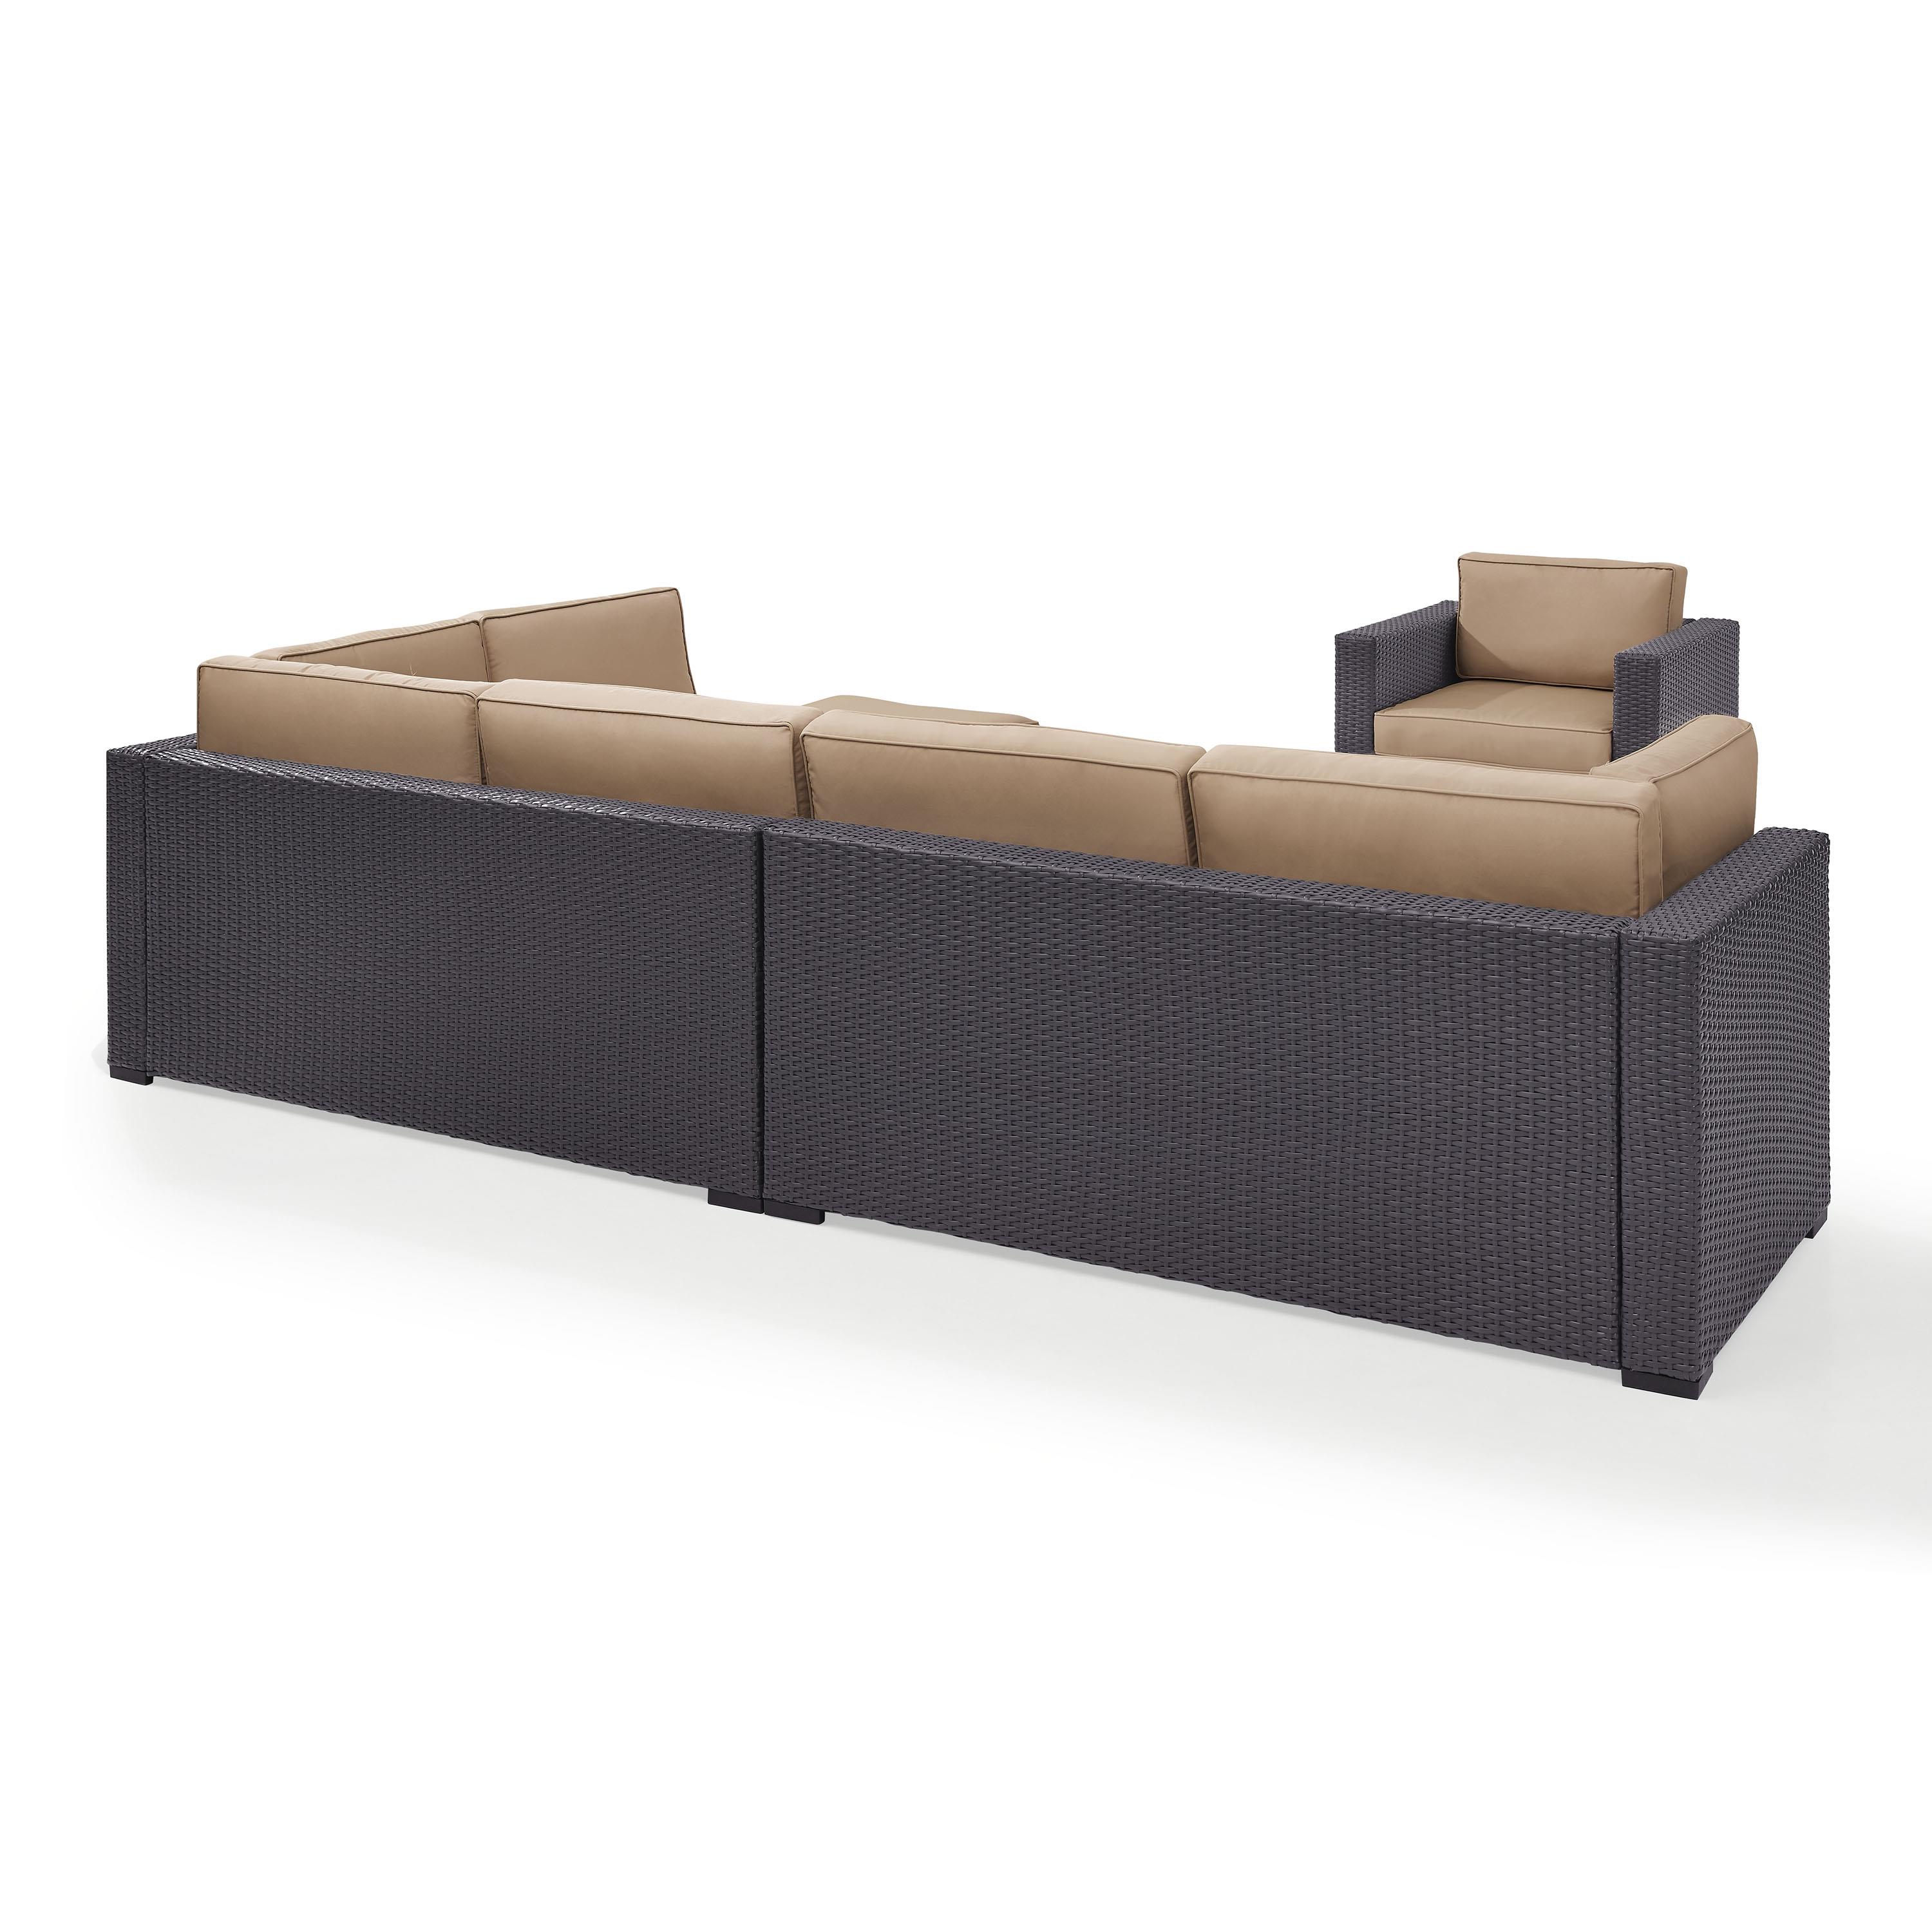 Biscayne 7 Person Outdoor Wicker Seating Set In Mocha - Two Loveseats, One Armless Chair, One Arm Chair, Coffee Table, Ottoman - image 3 of 4